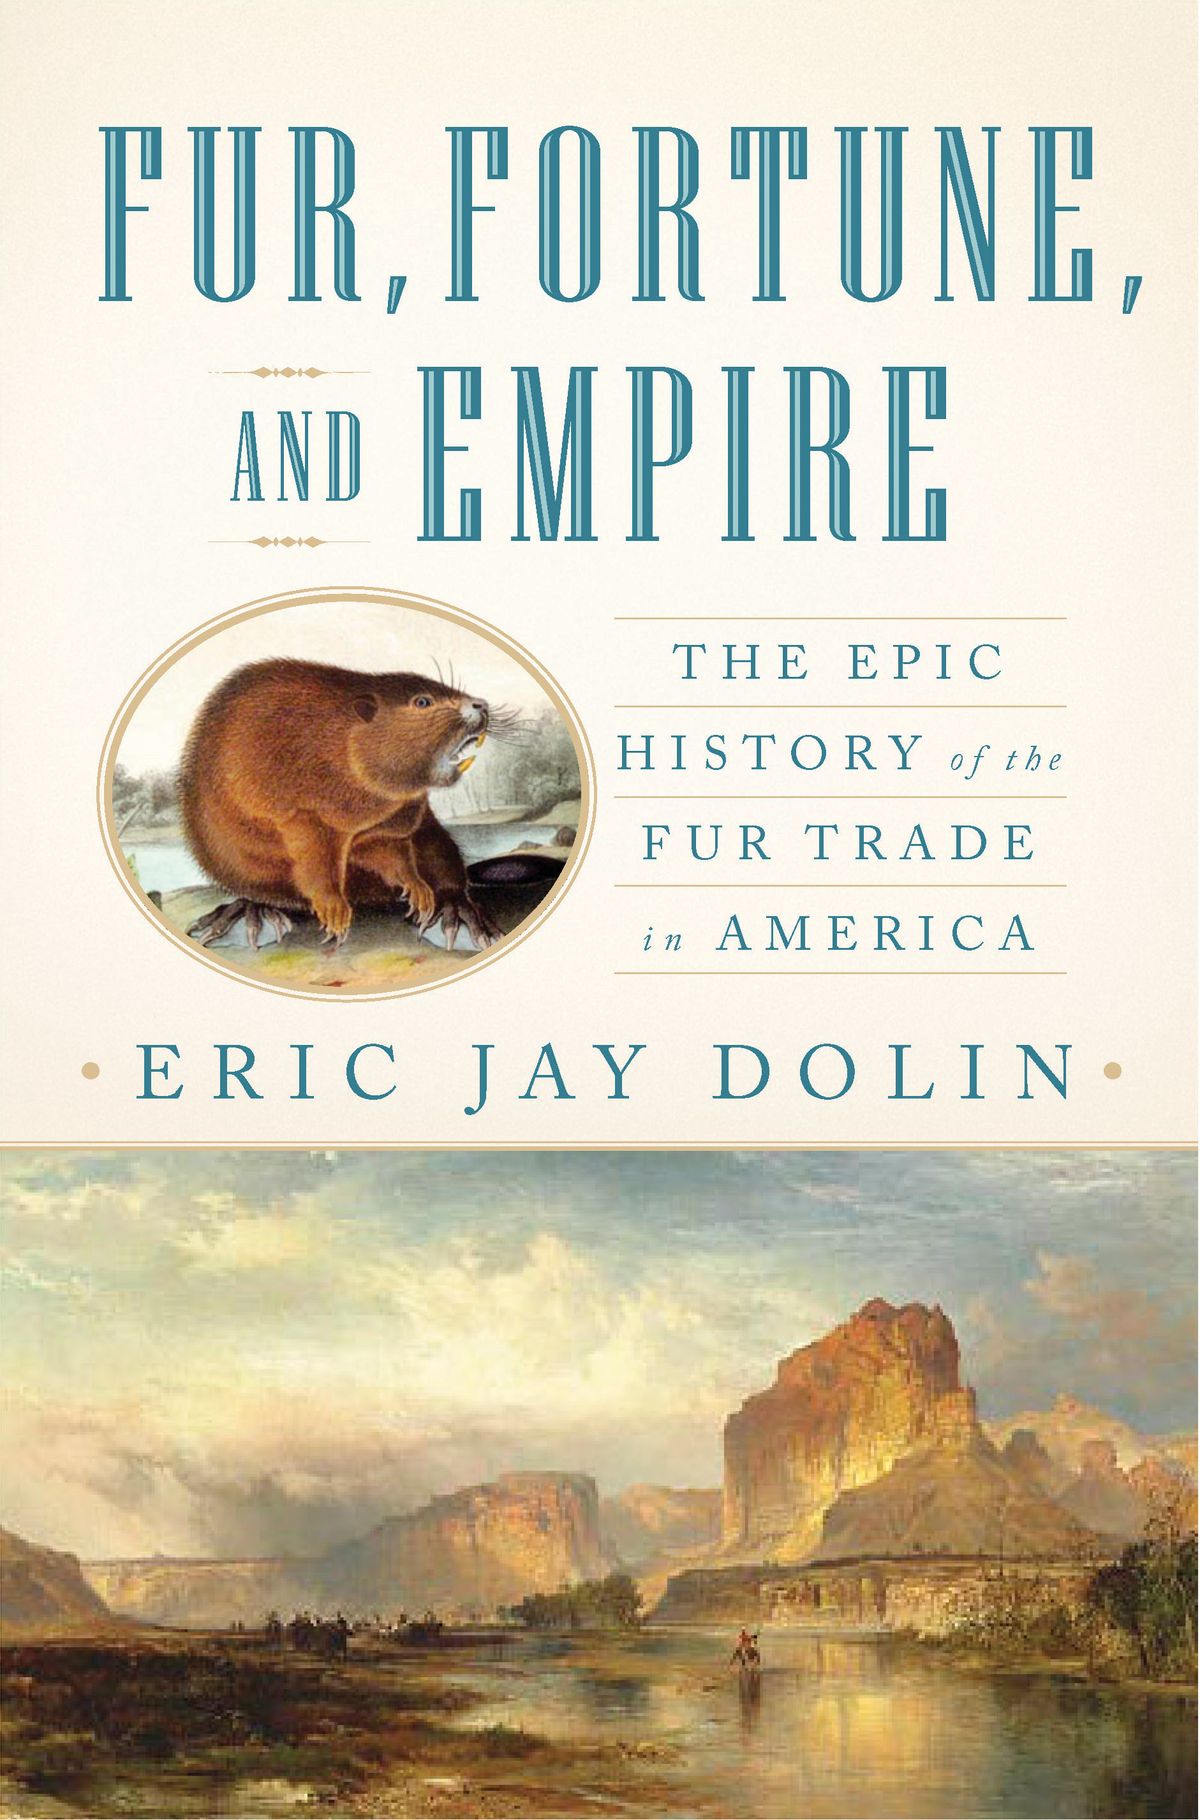 "Fur, Fortune, and Empire" by Eric Jay Dolin